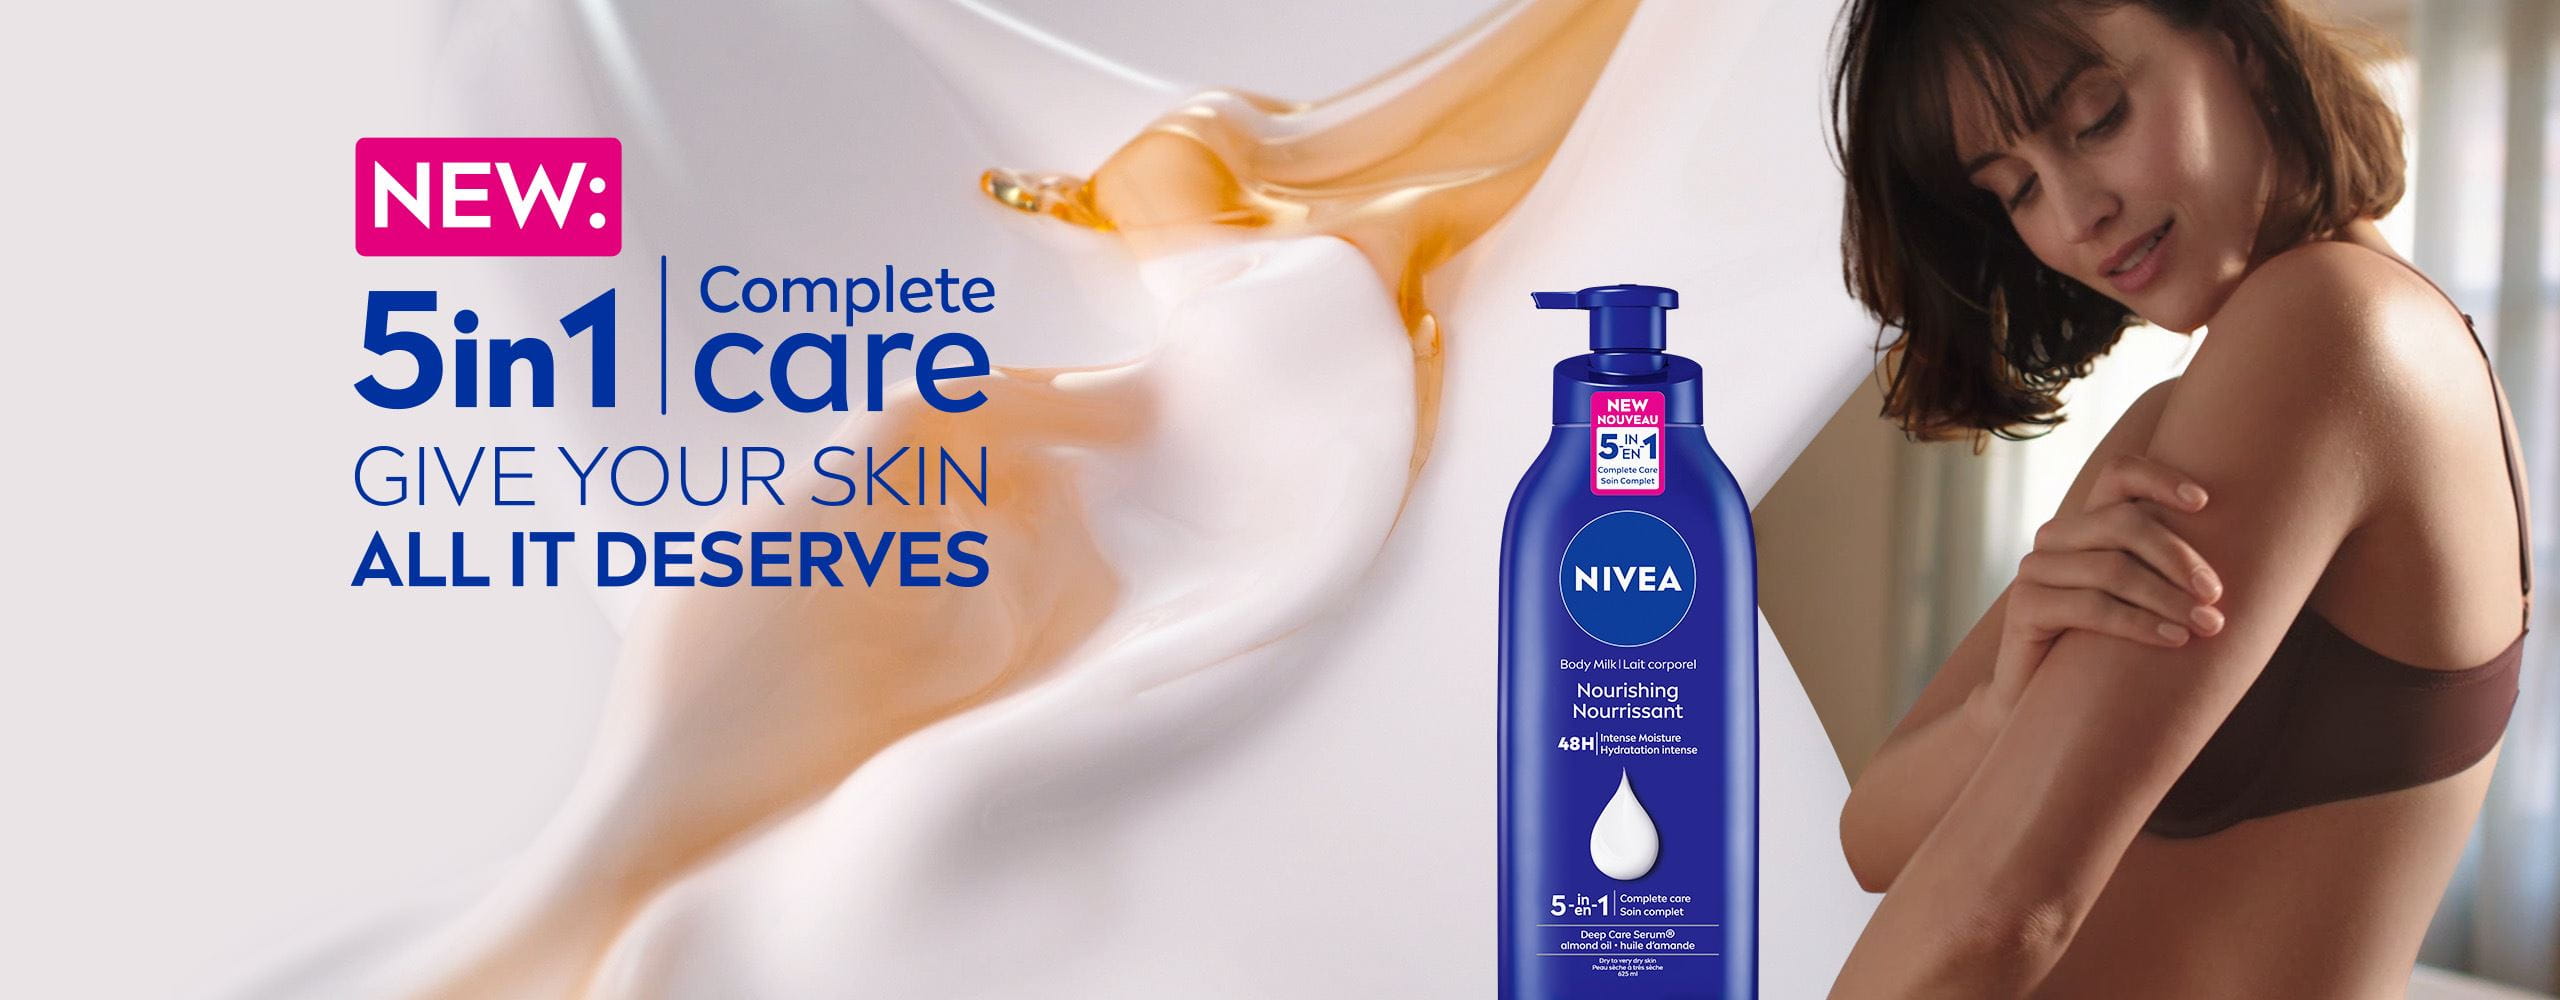 View of a female model holding her left arm with a NIVEA 5in1 Complete Care Nourishing Body Milk product and product text displayed to the left. 